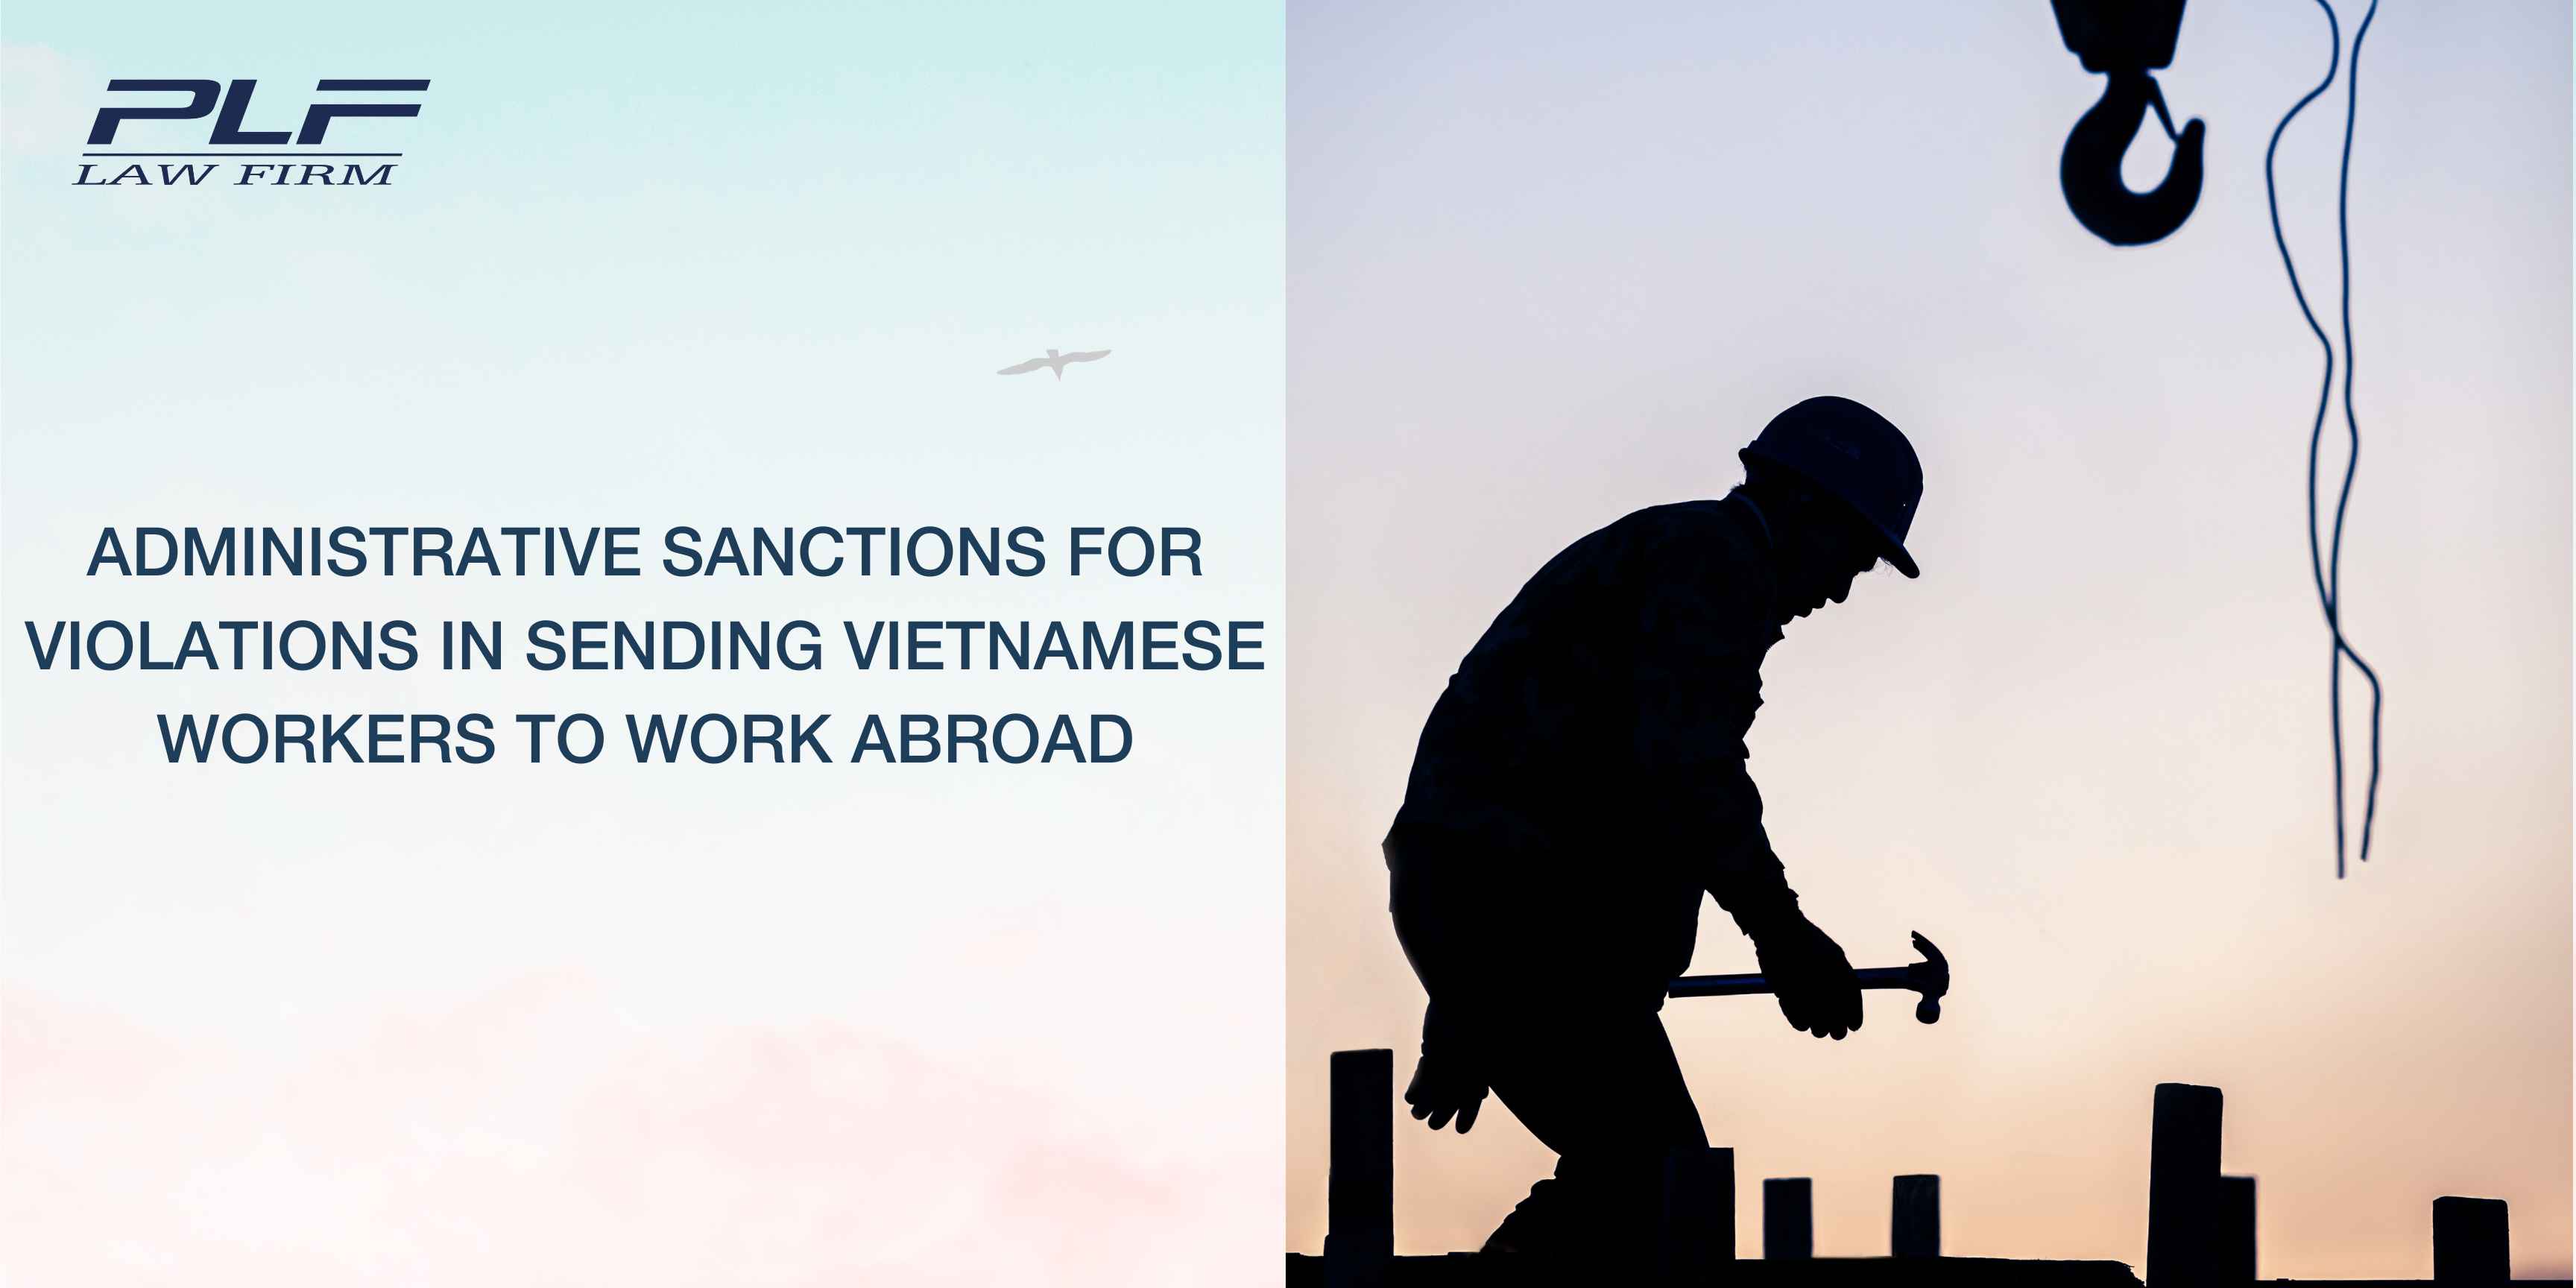 Plf Administrative Sanctions For Violations In Sending Vietnamese Workers To Work Abroad